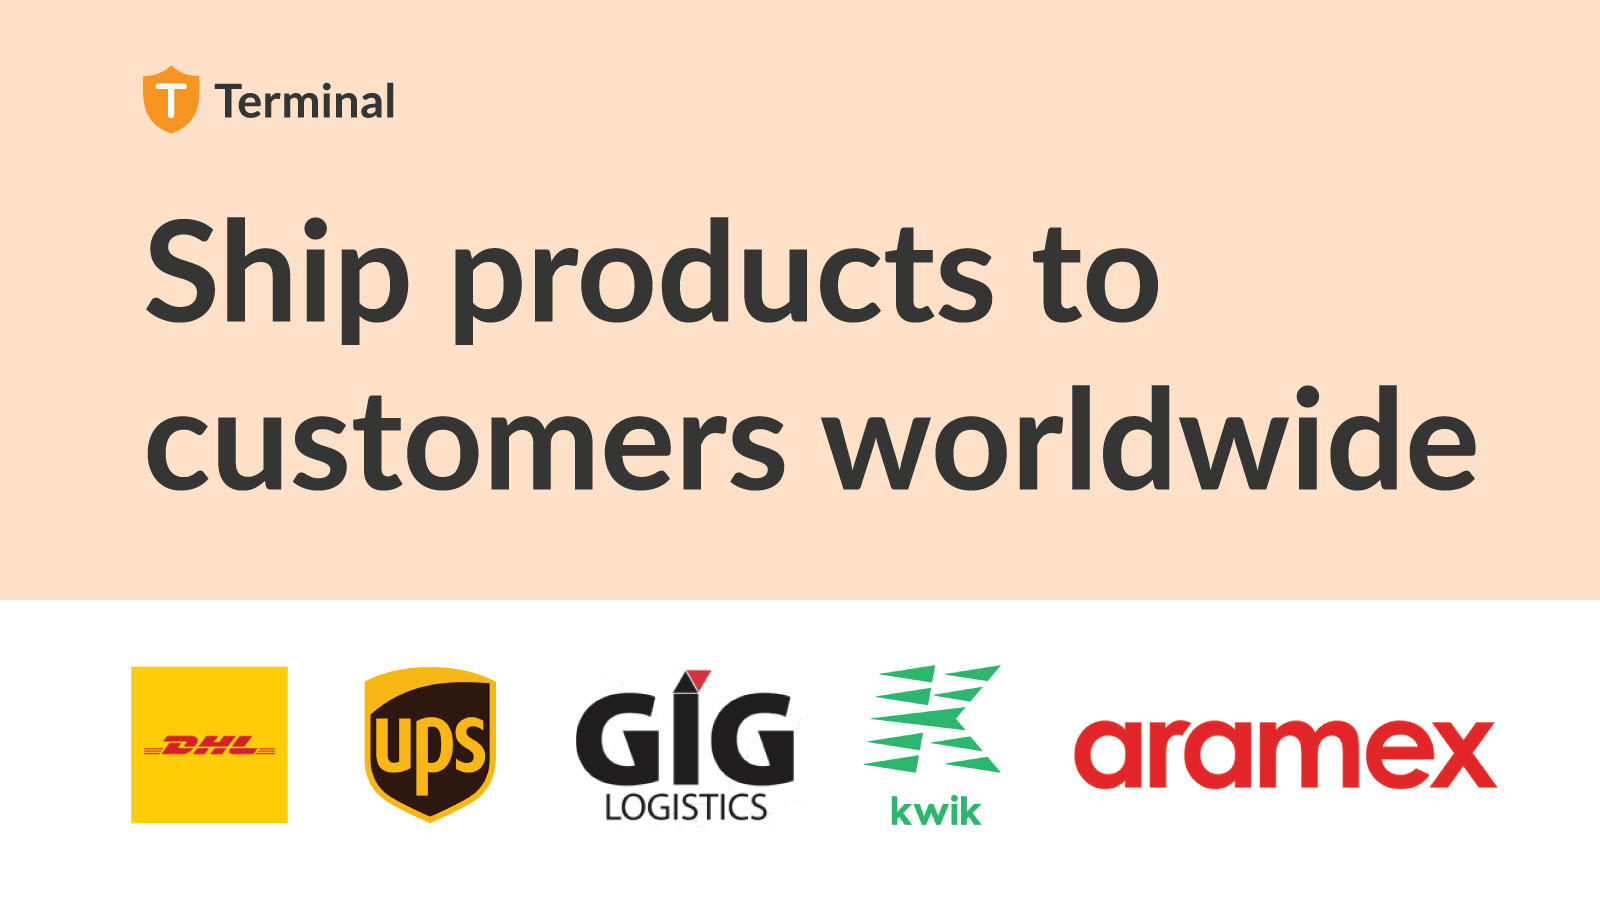 Ship products to customers worldwide with DHL, UPS, FedEx, GIGL